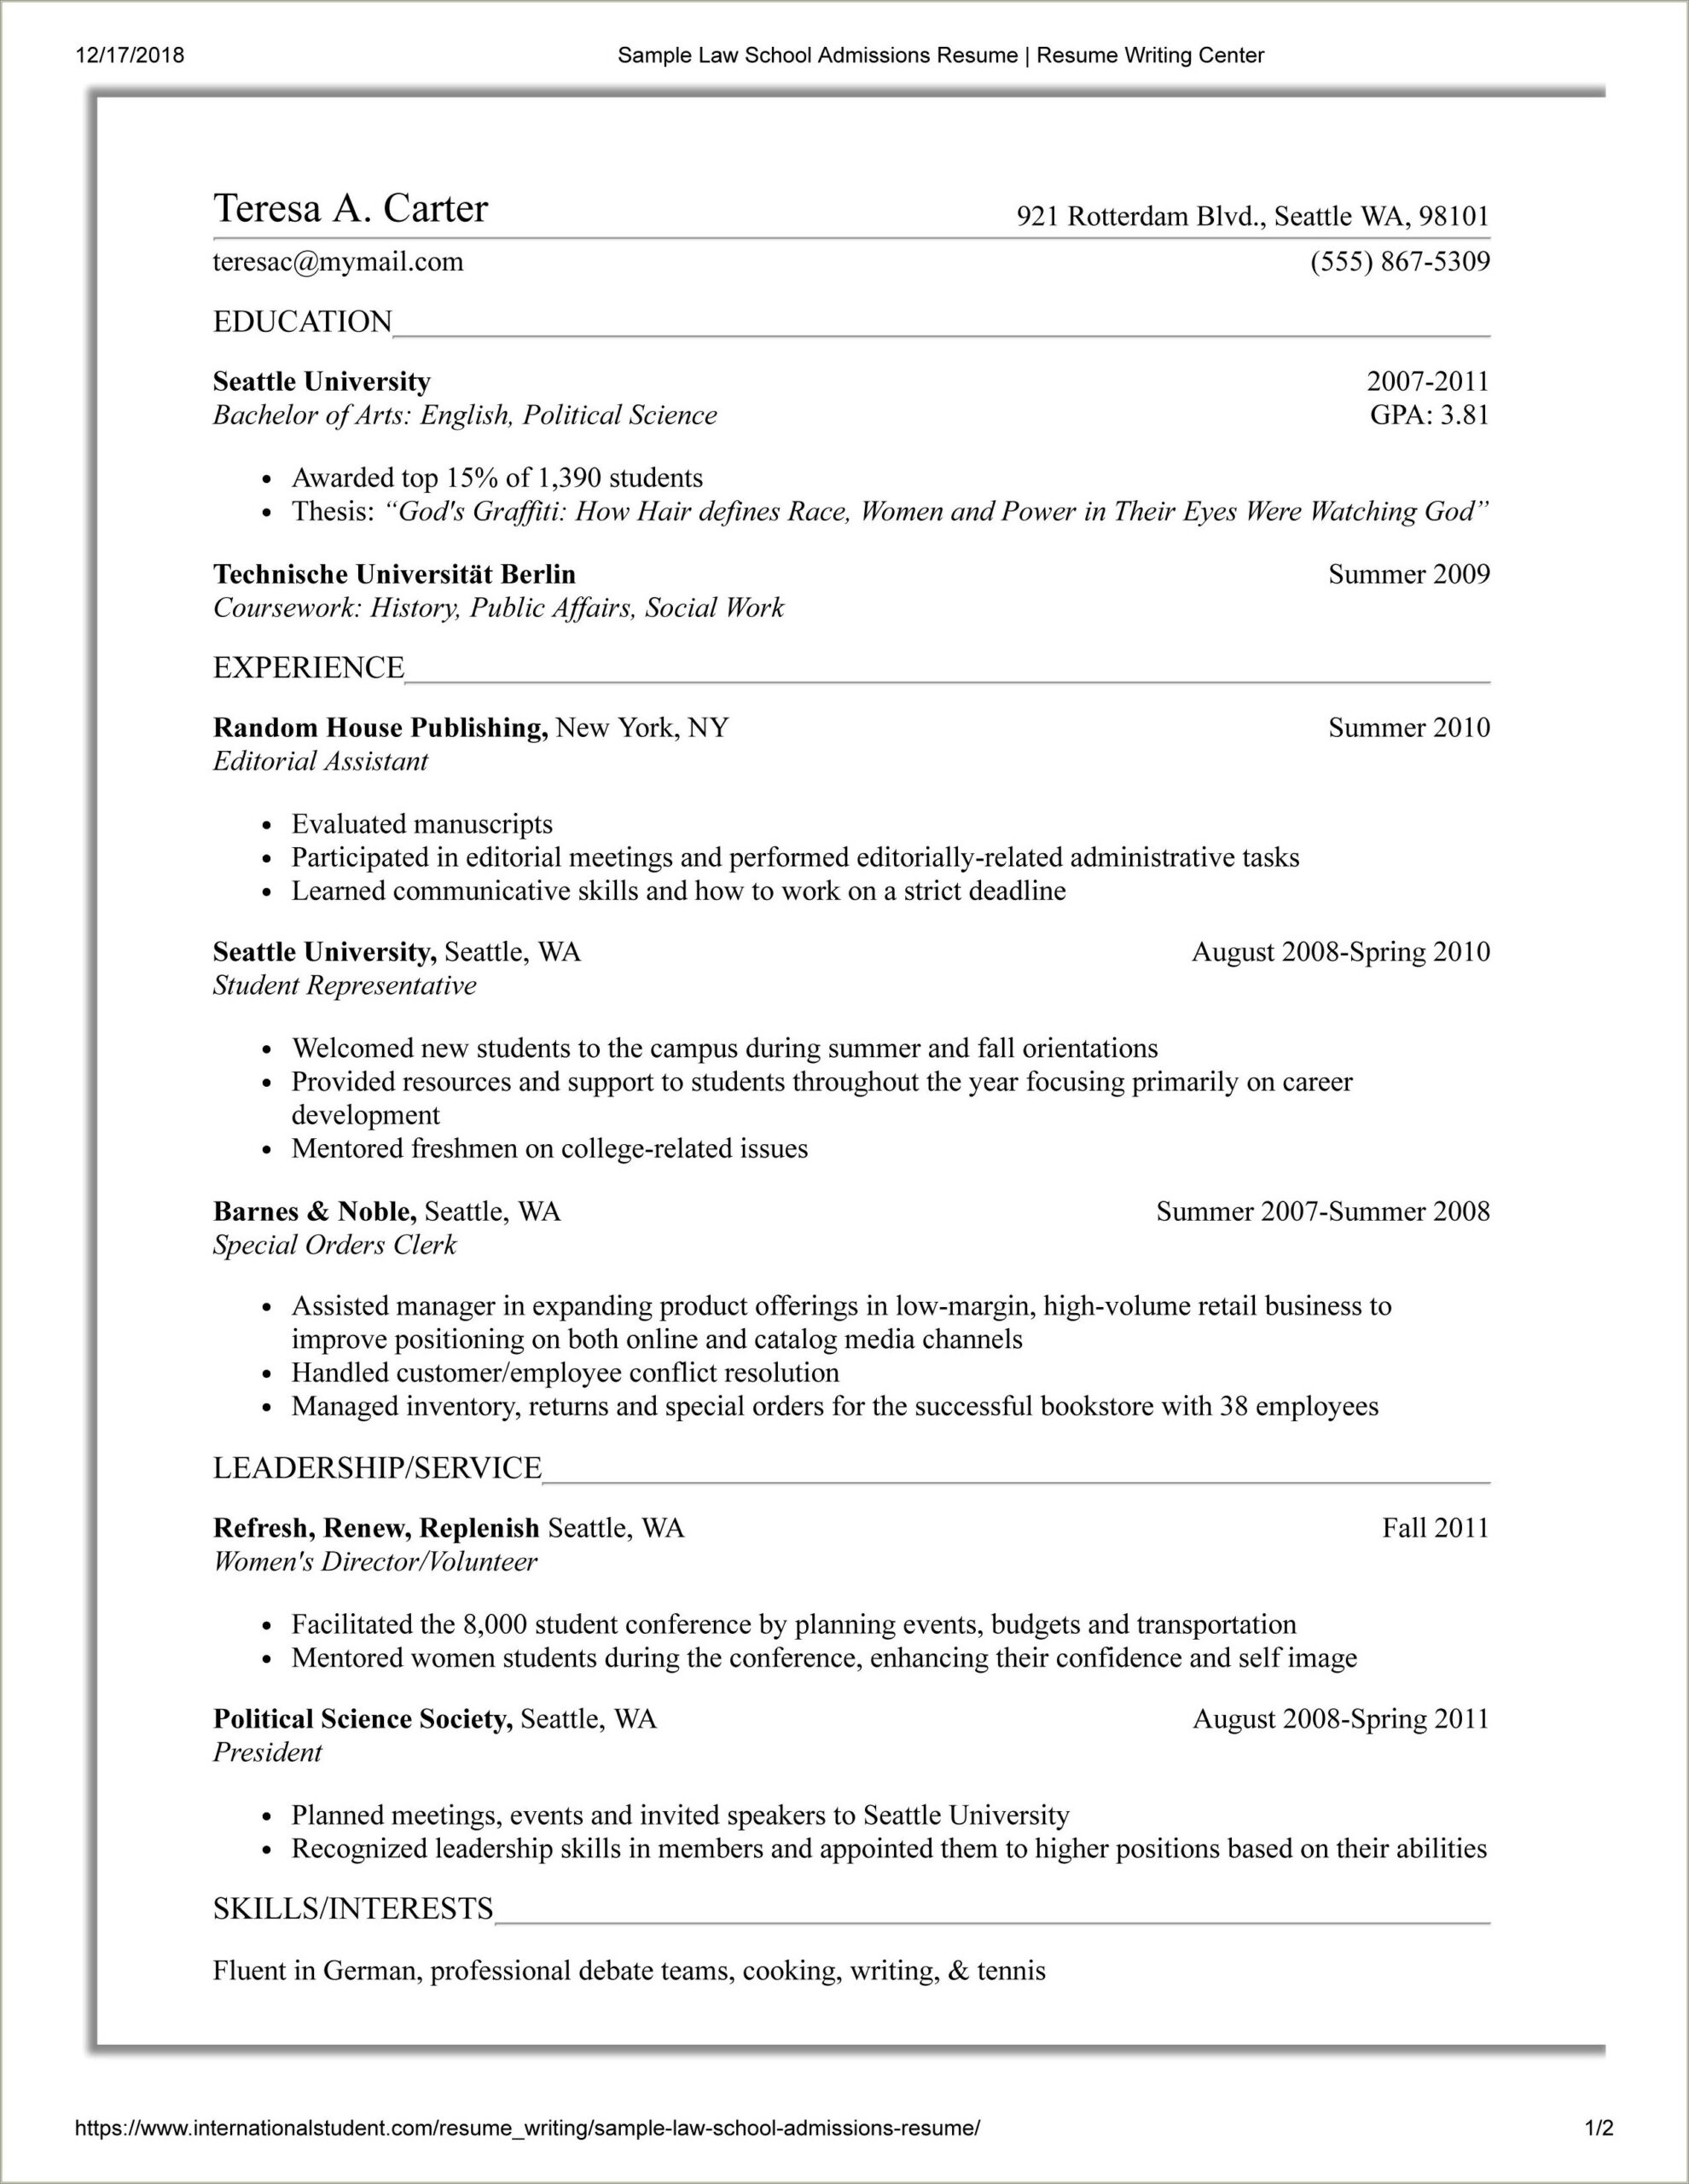 Resume Examples For Law School